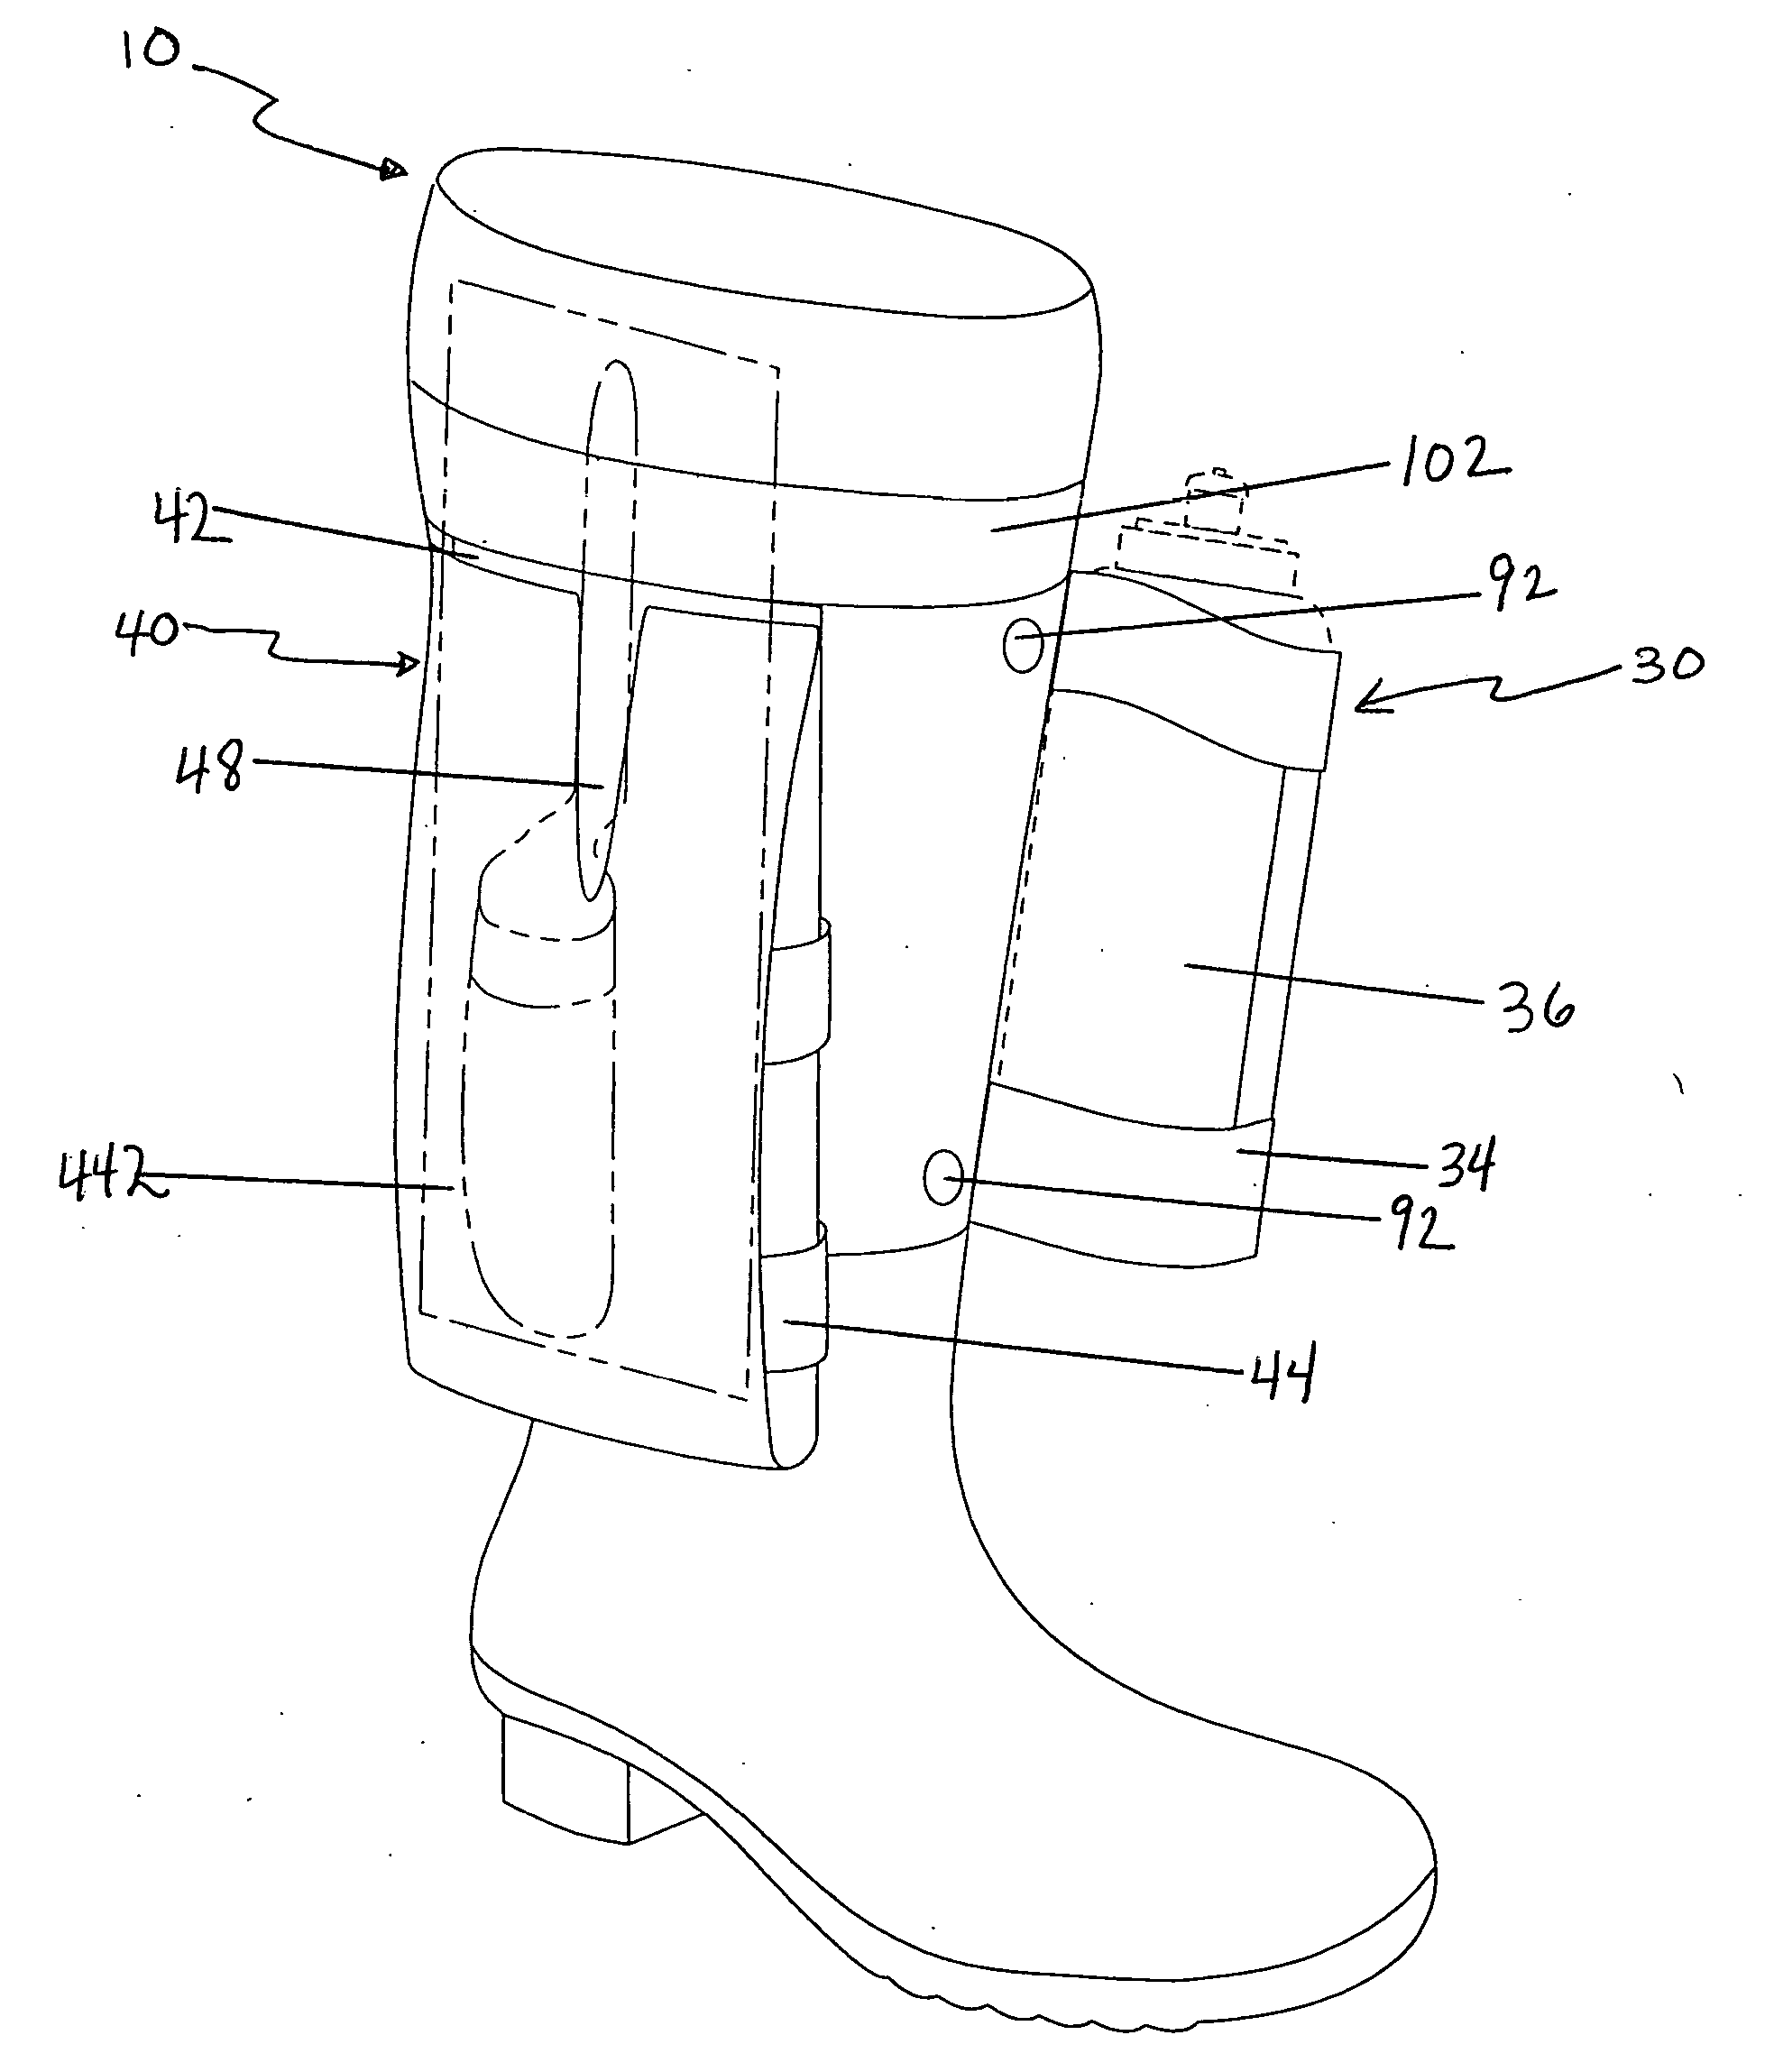 Utility boot with interchangeable article carriers and method for using the same